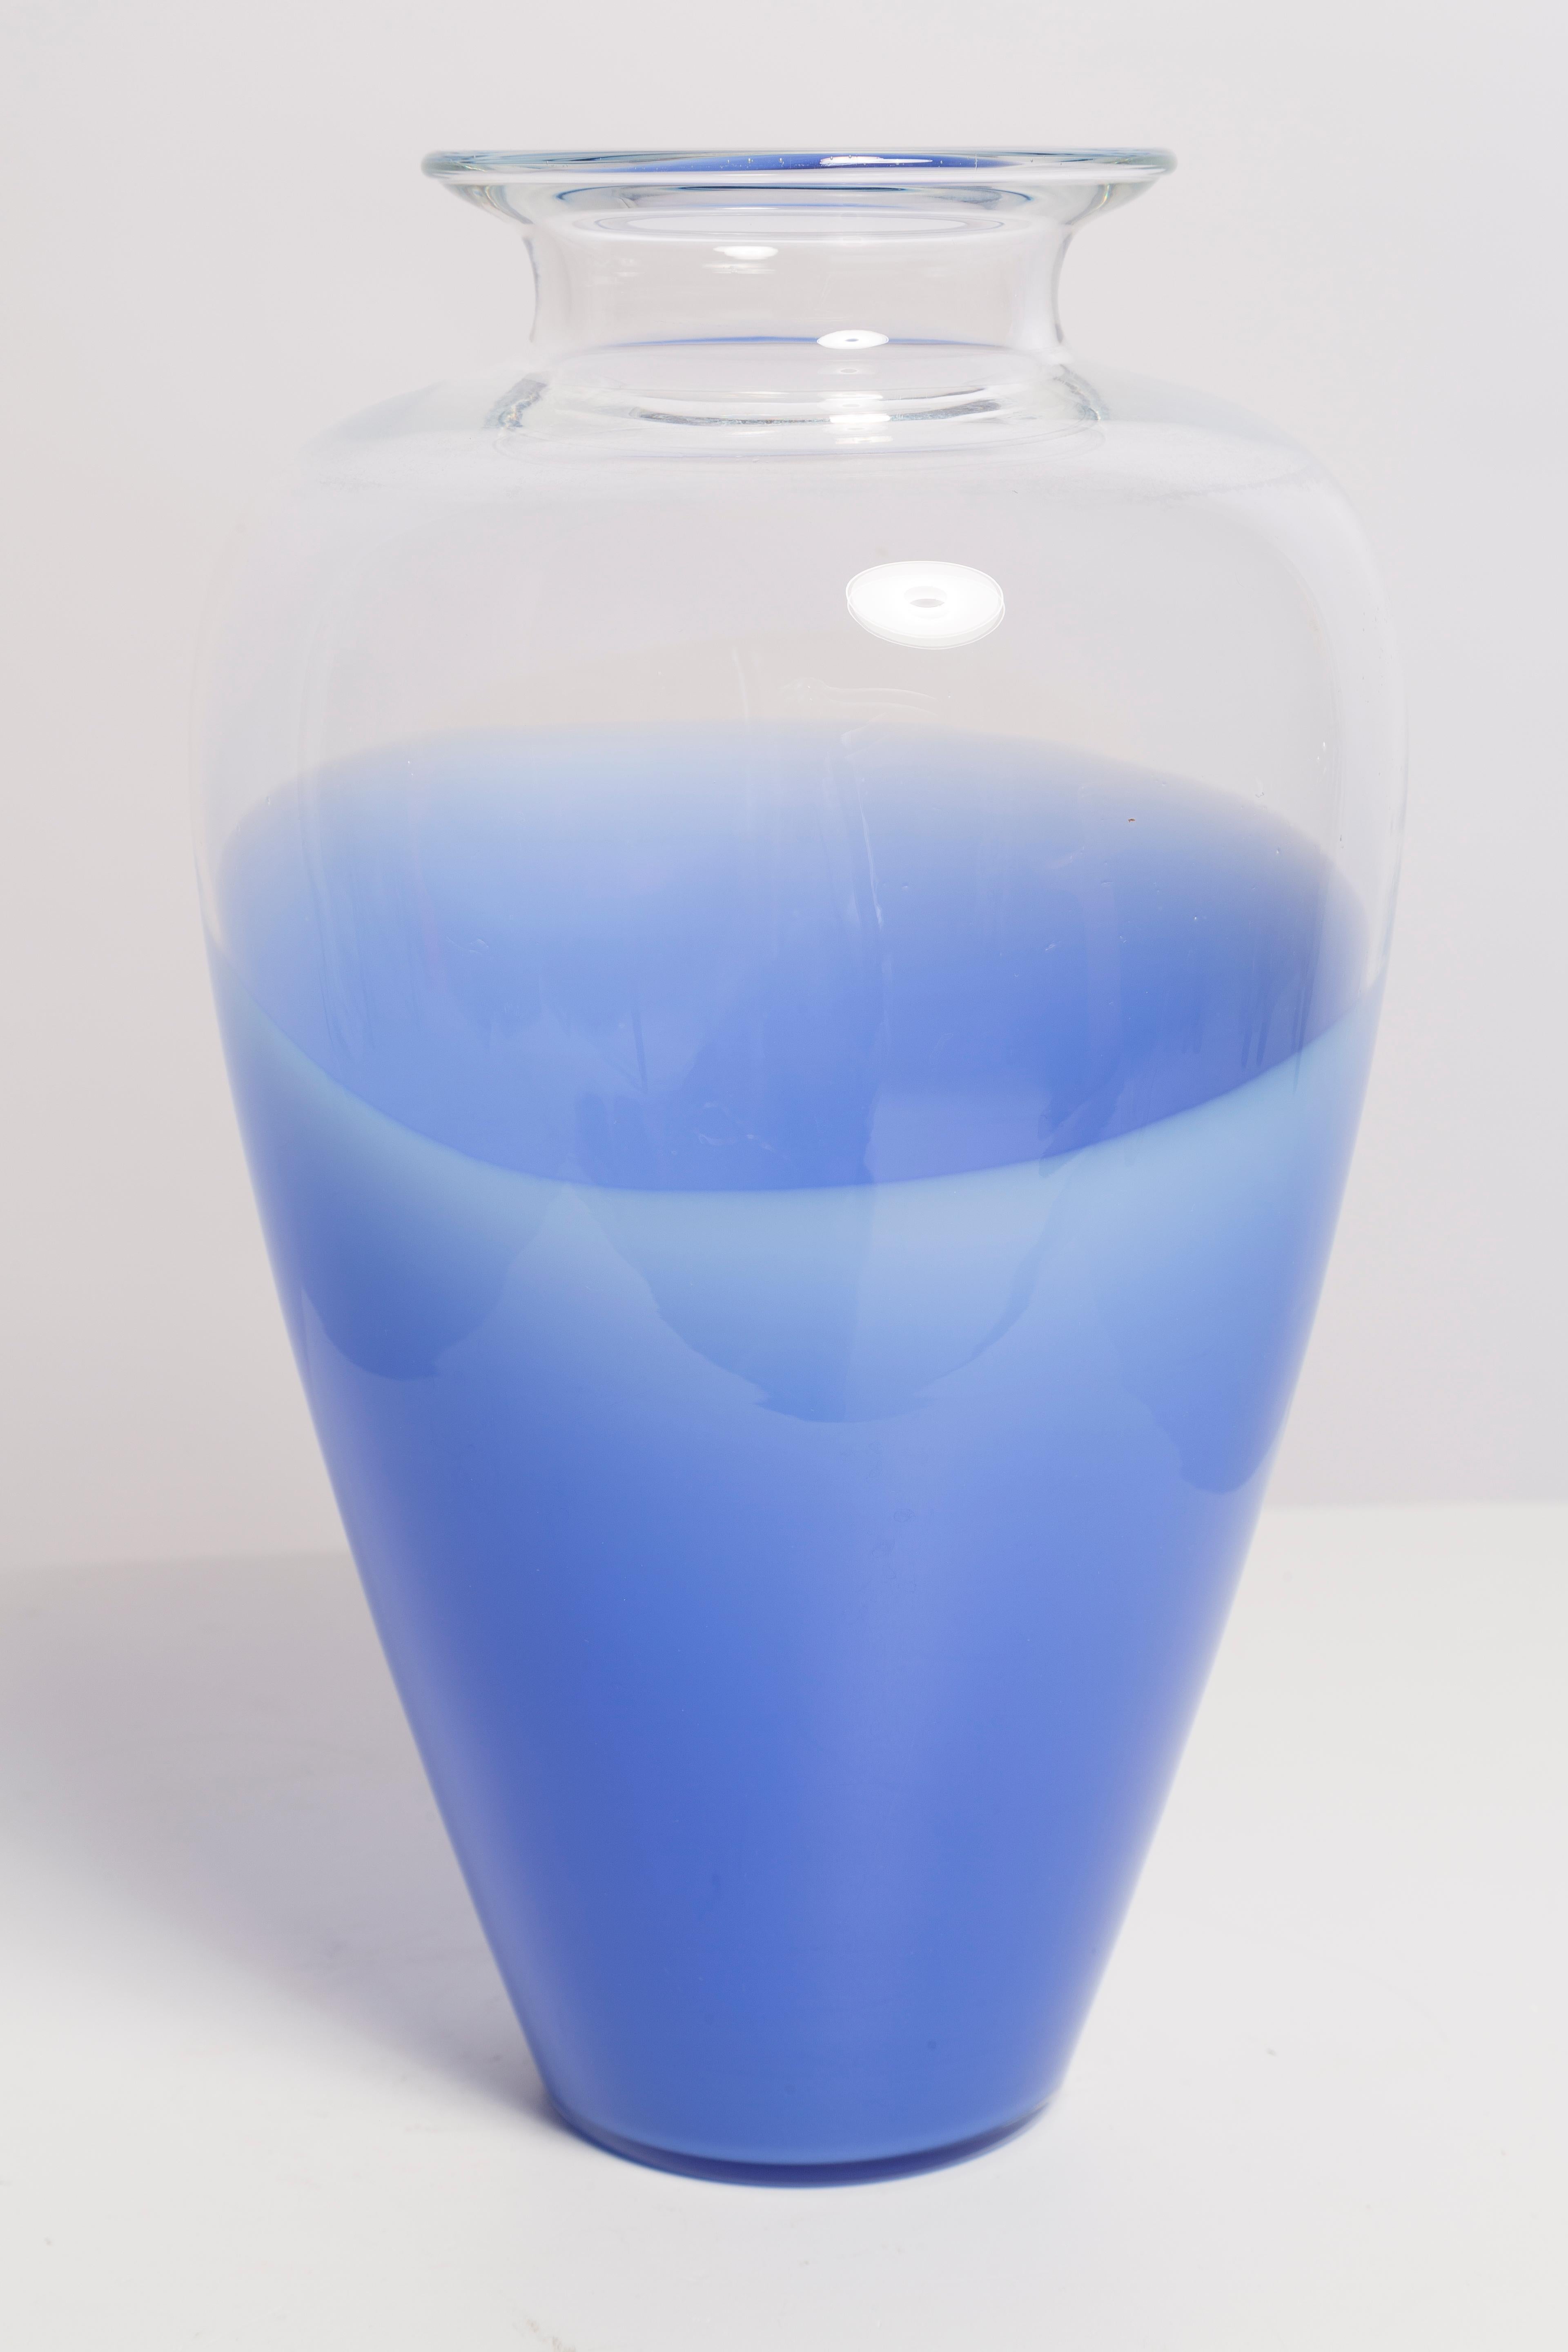 Glass Mid Century Vintage Blue and Transparent Big Vase, Italy, 1960s For Sale